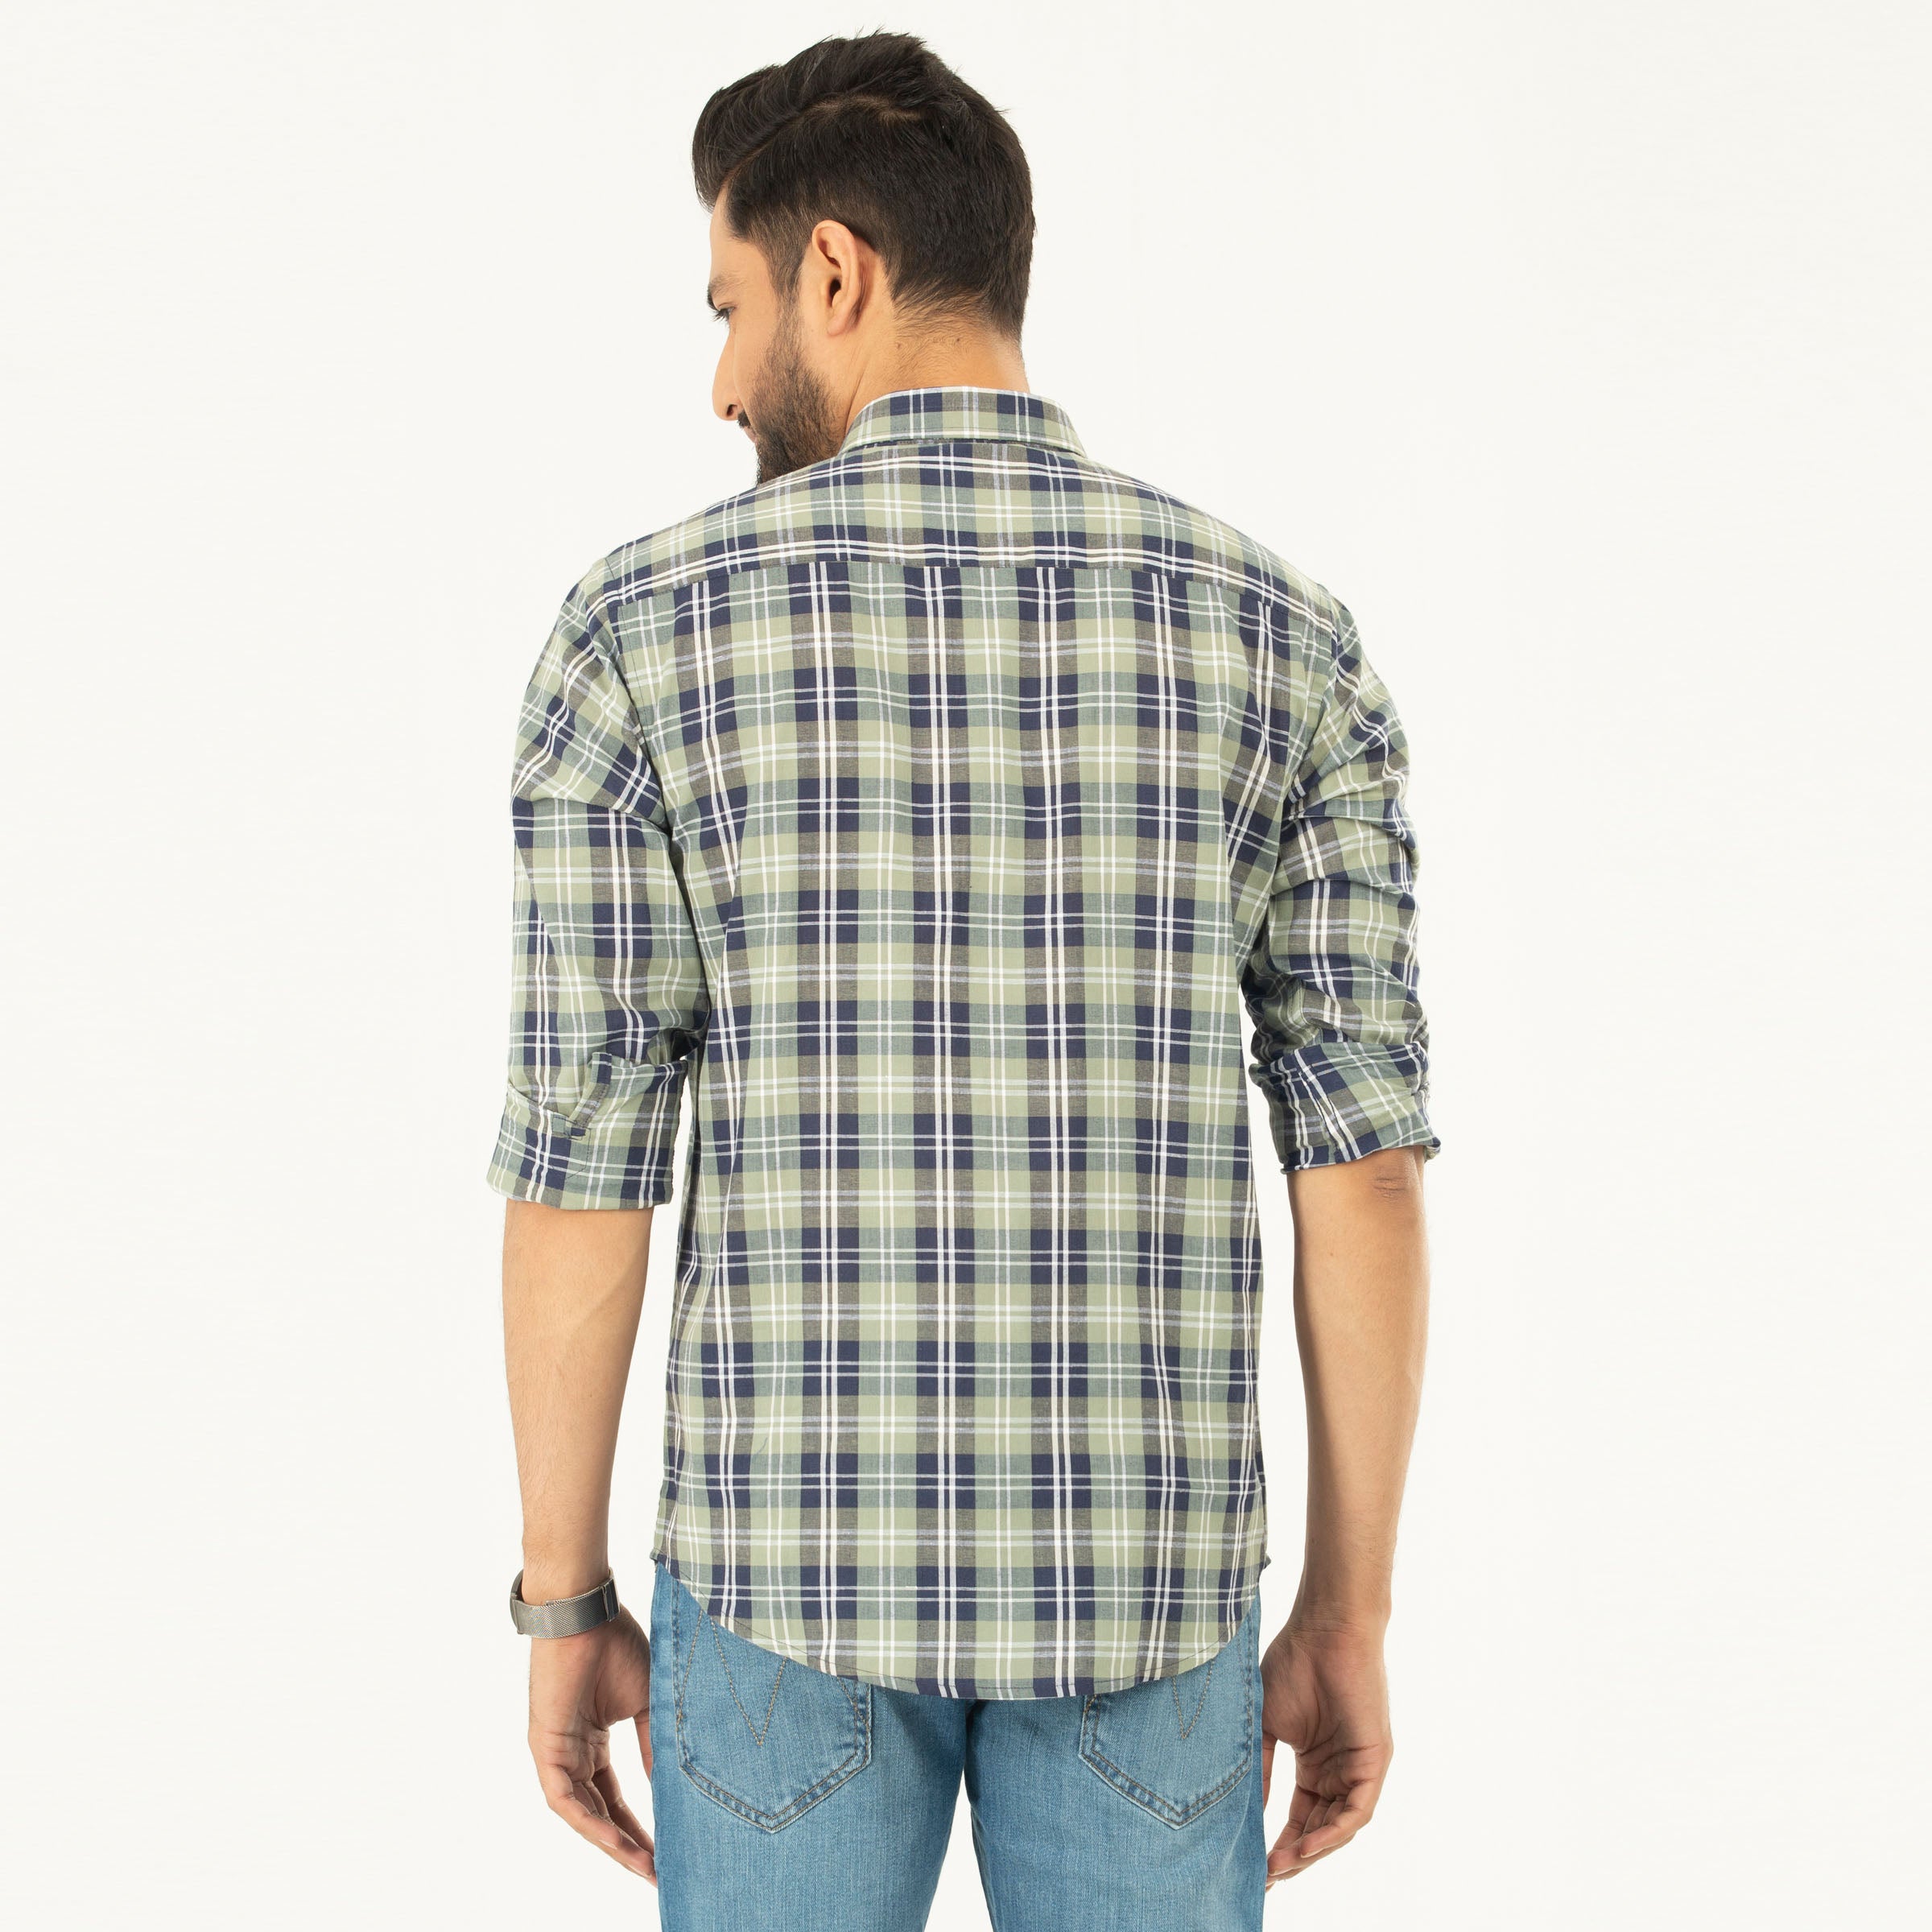 Smart casual check shirt - Olive & Navy